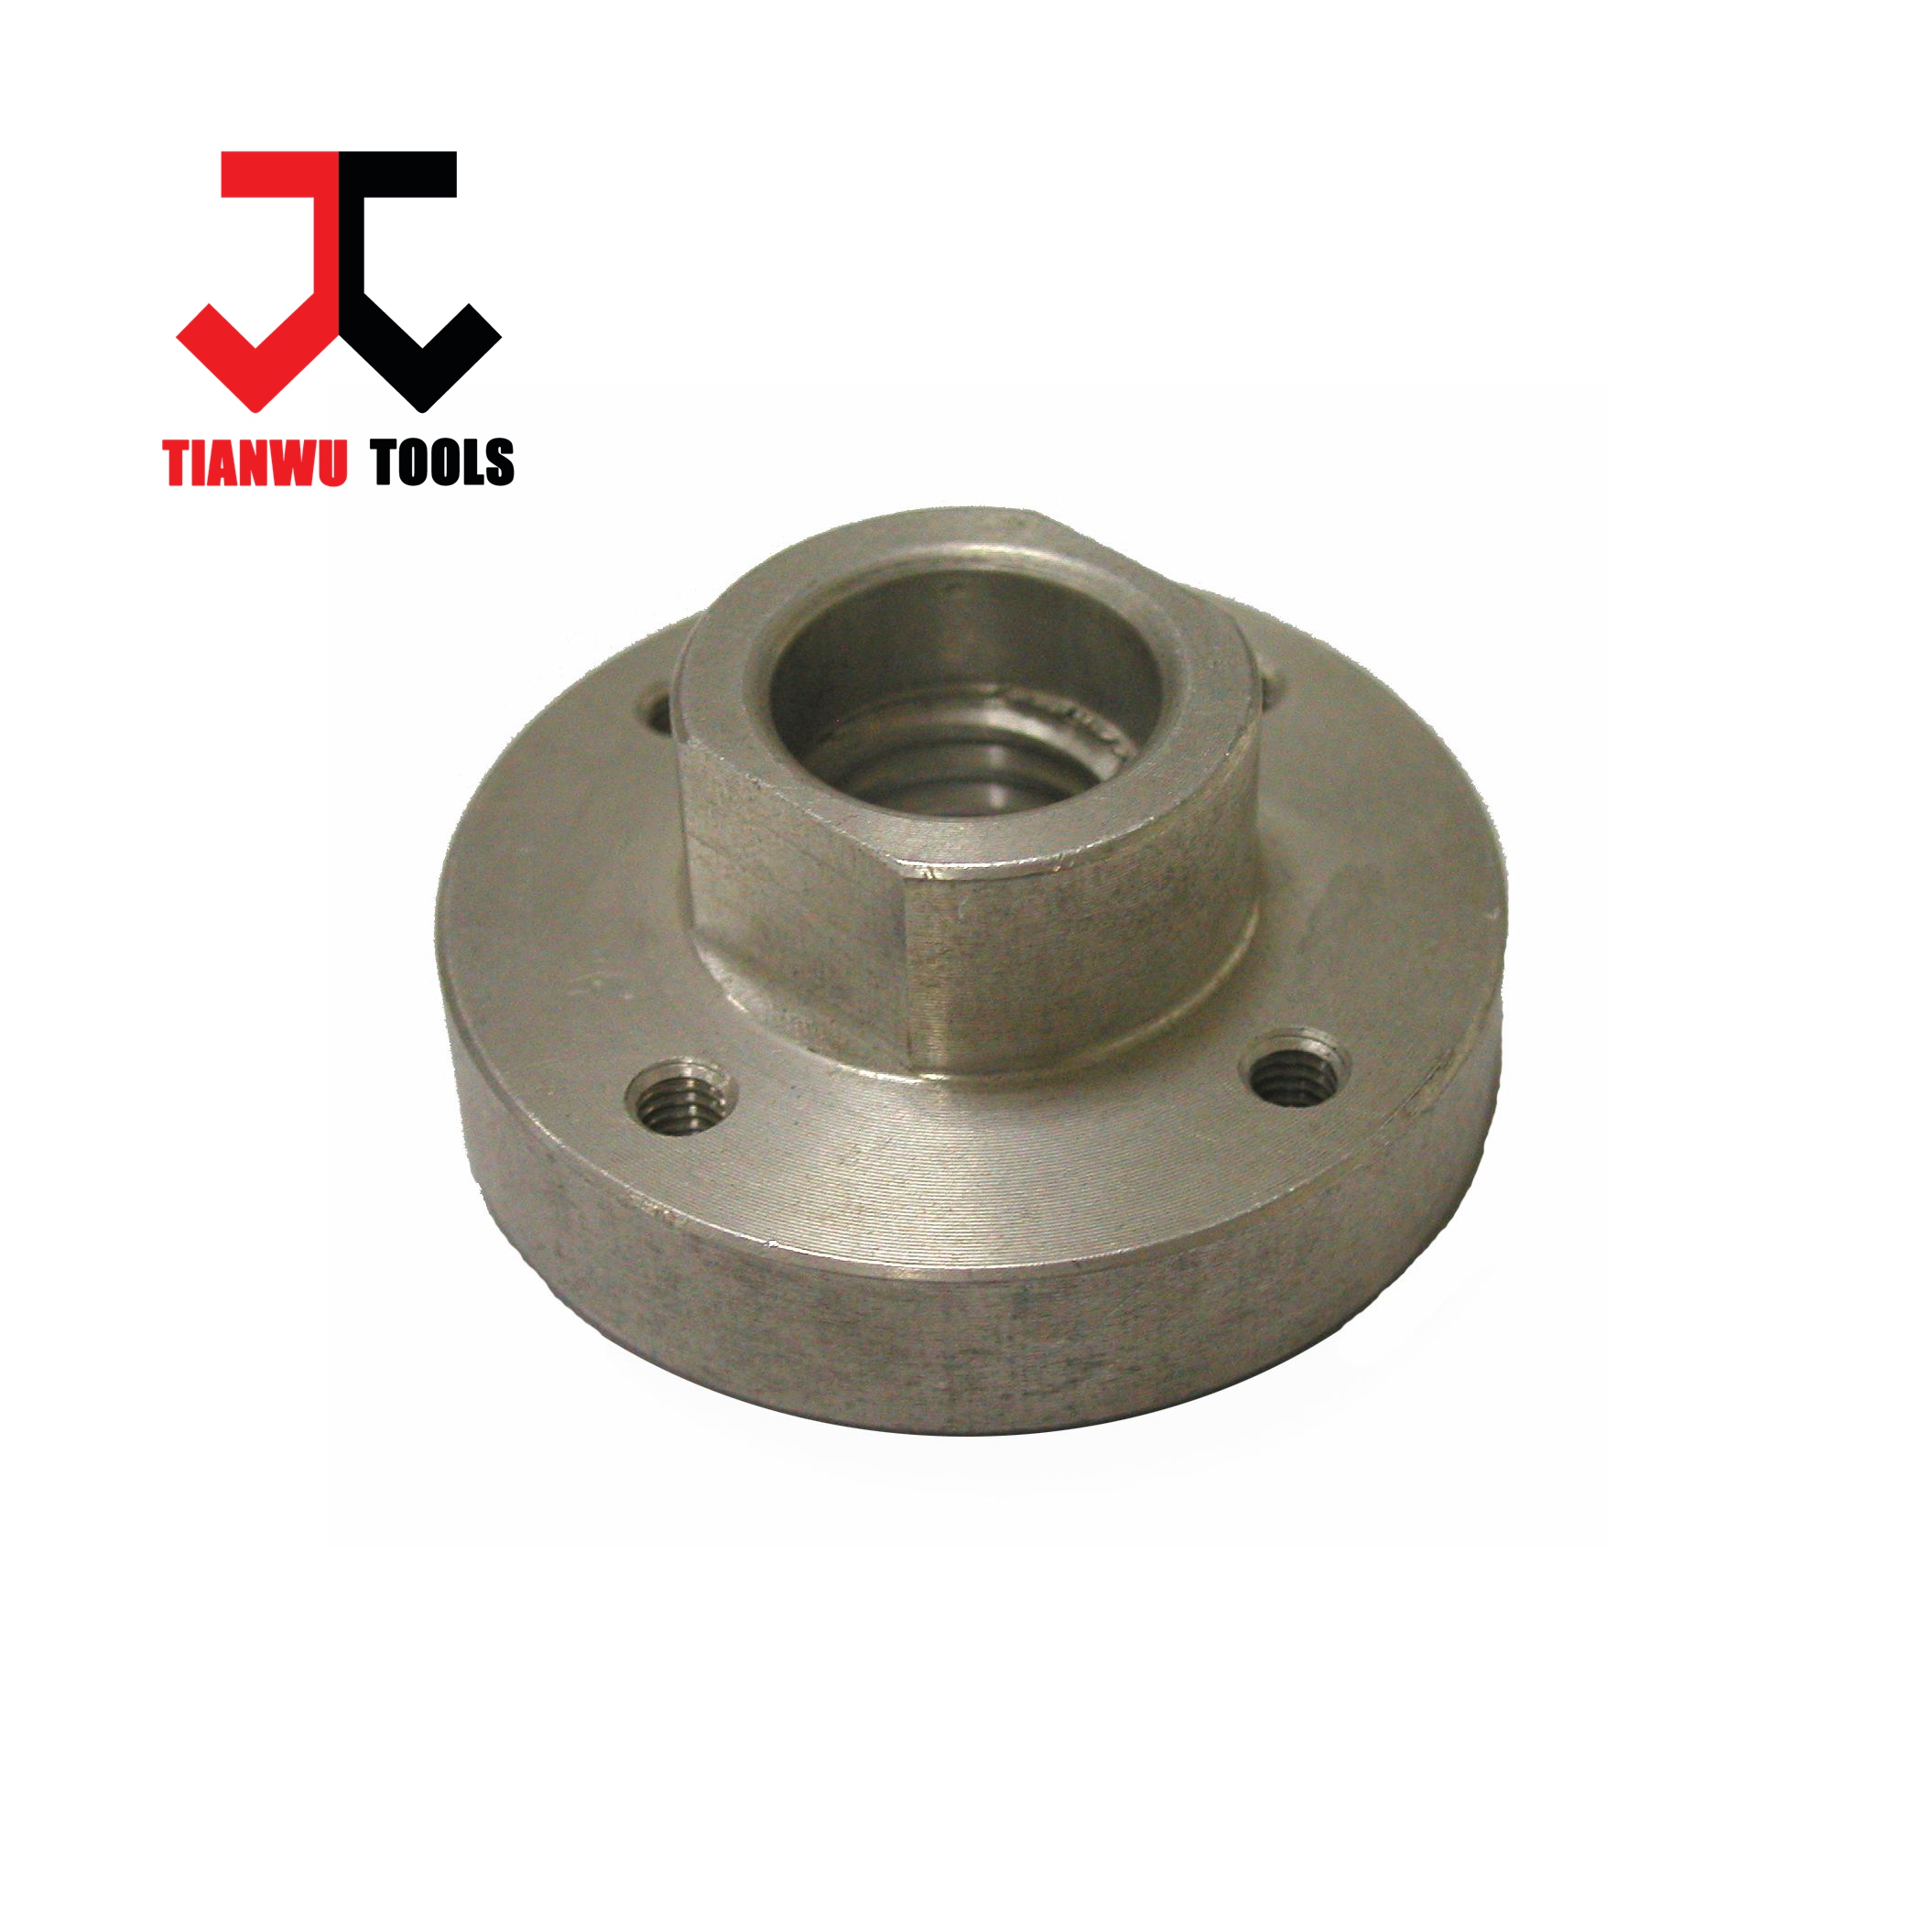 TW4218 Flange of the saw blade , M14 inner Flange joint for mini saw blade ,Steel